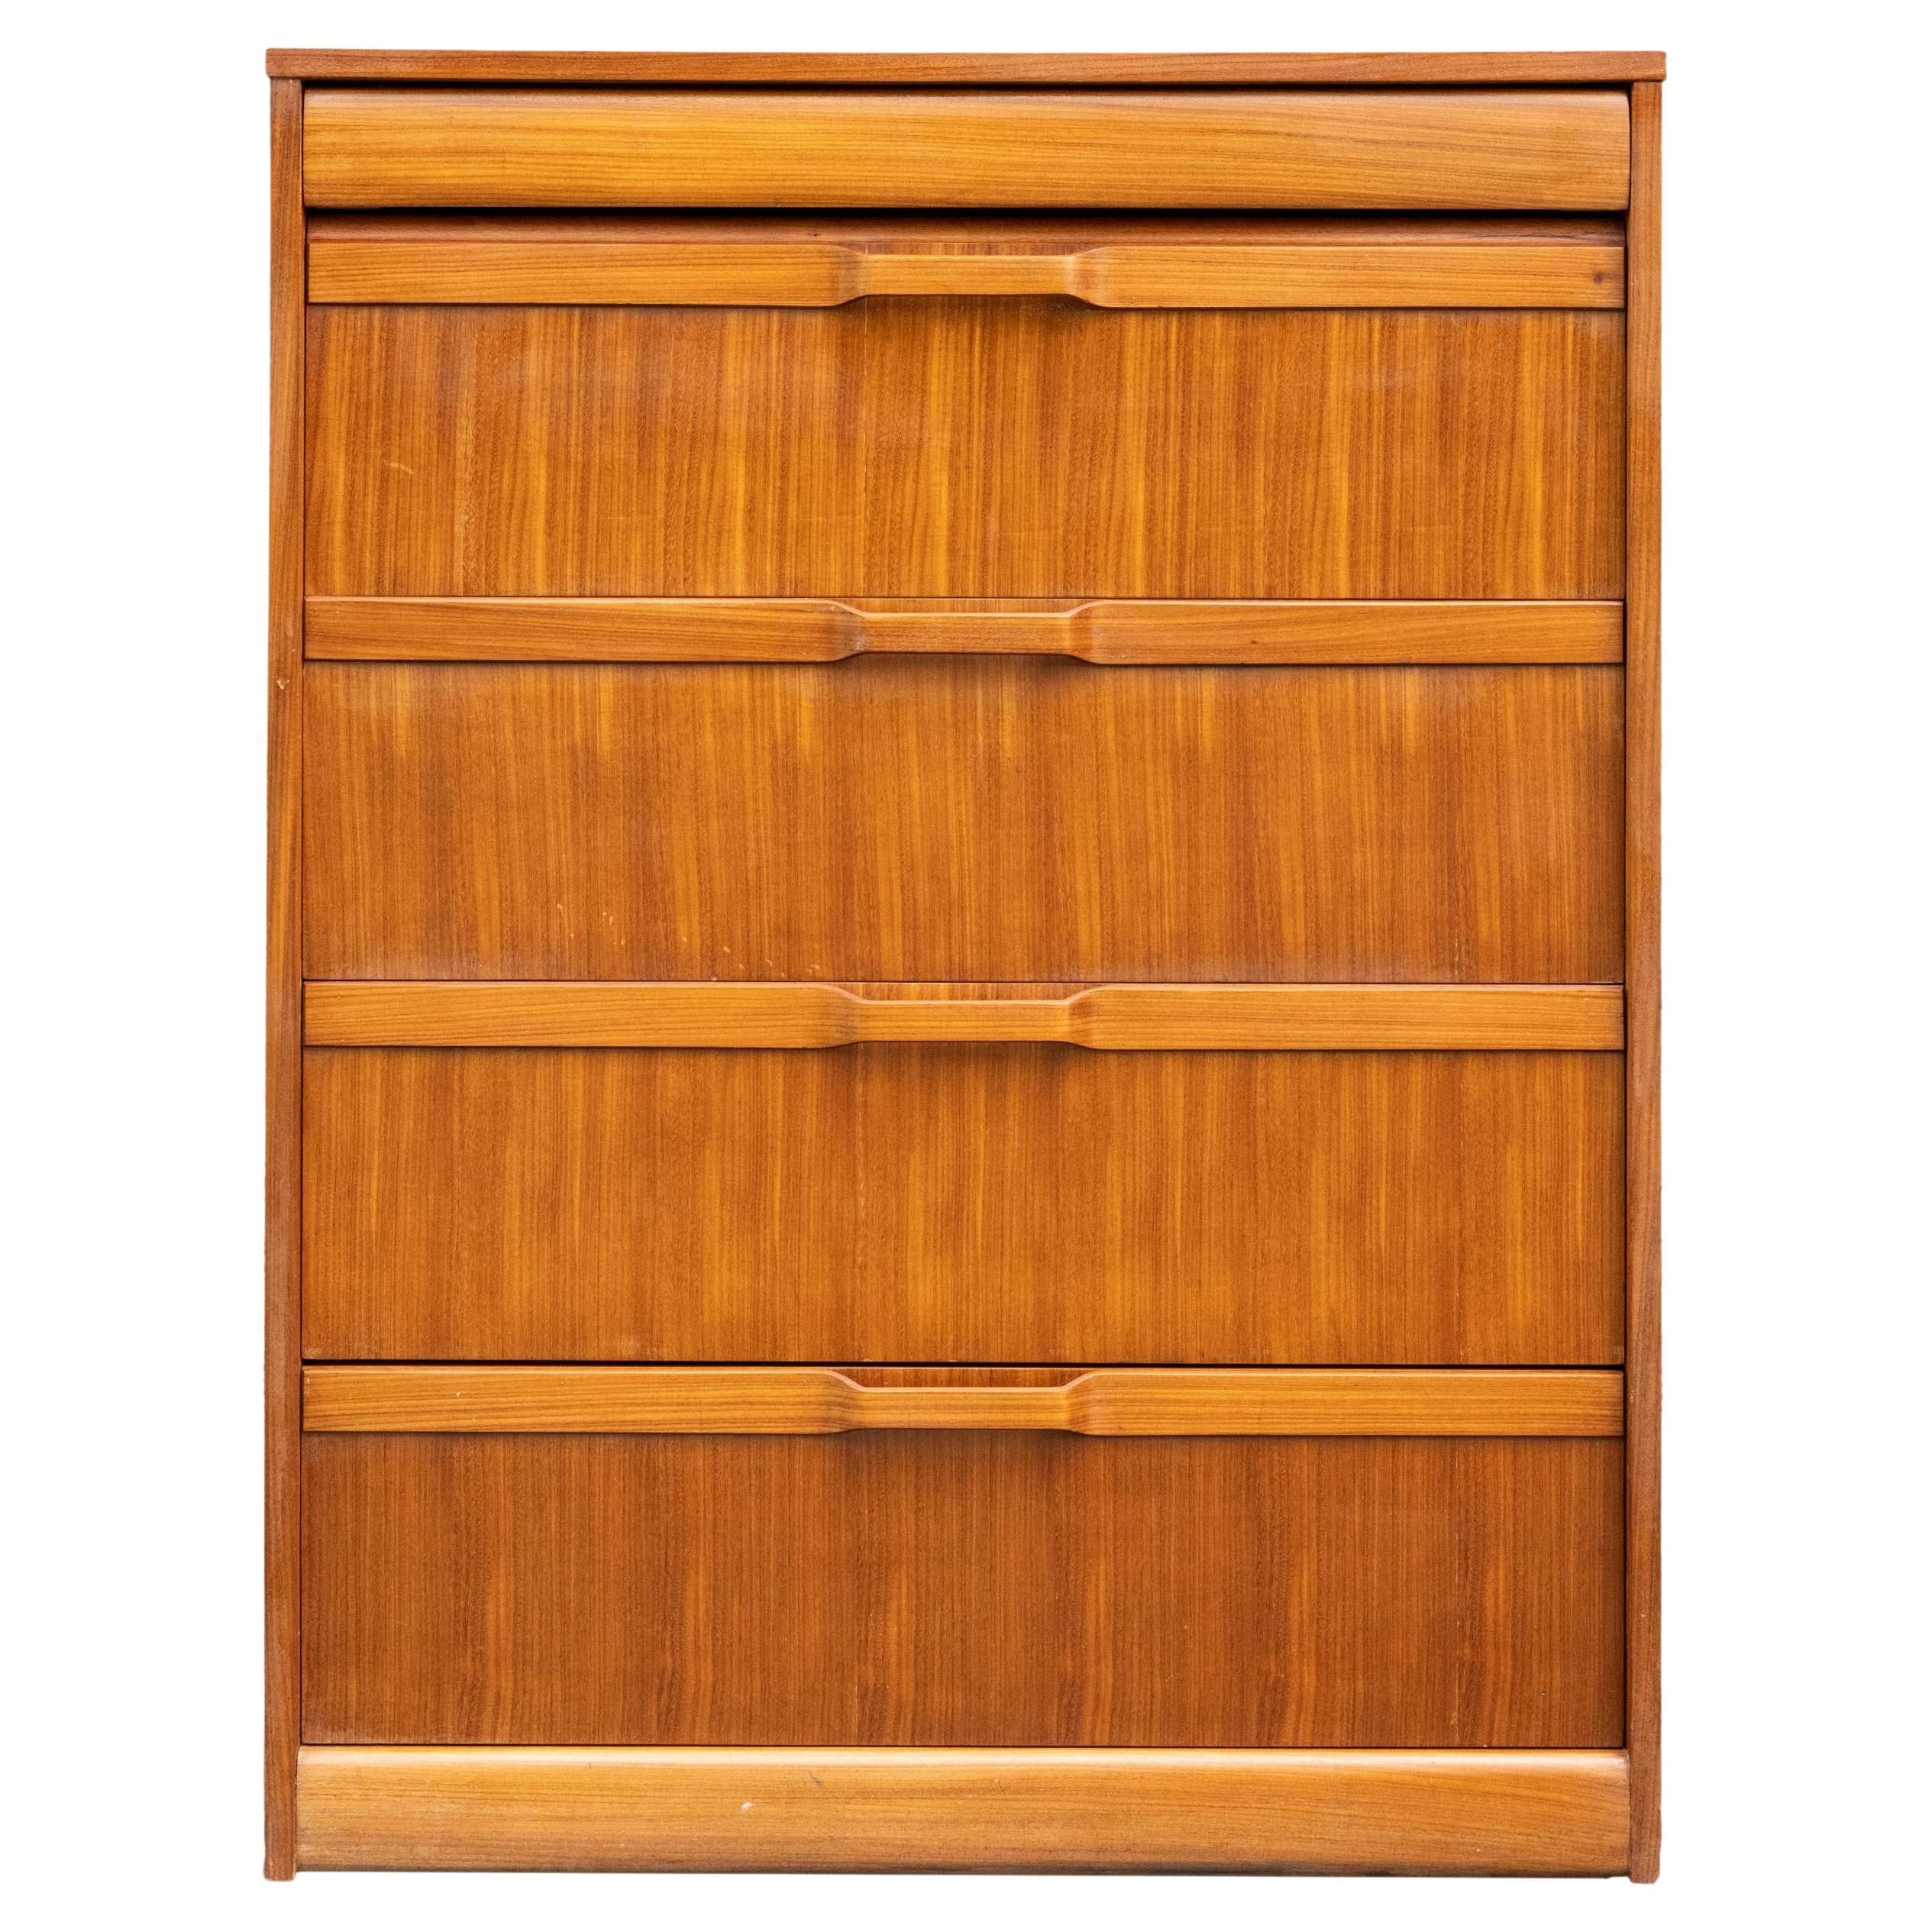 Mid-Century Modern Teak and Elm Chest-of-Drawers, Danish, Dated 1971